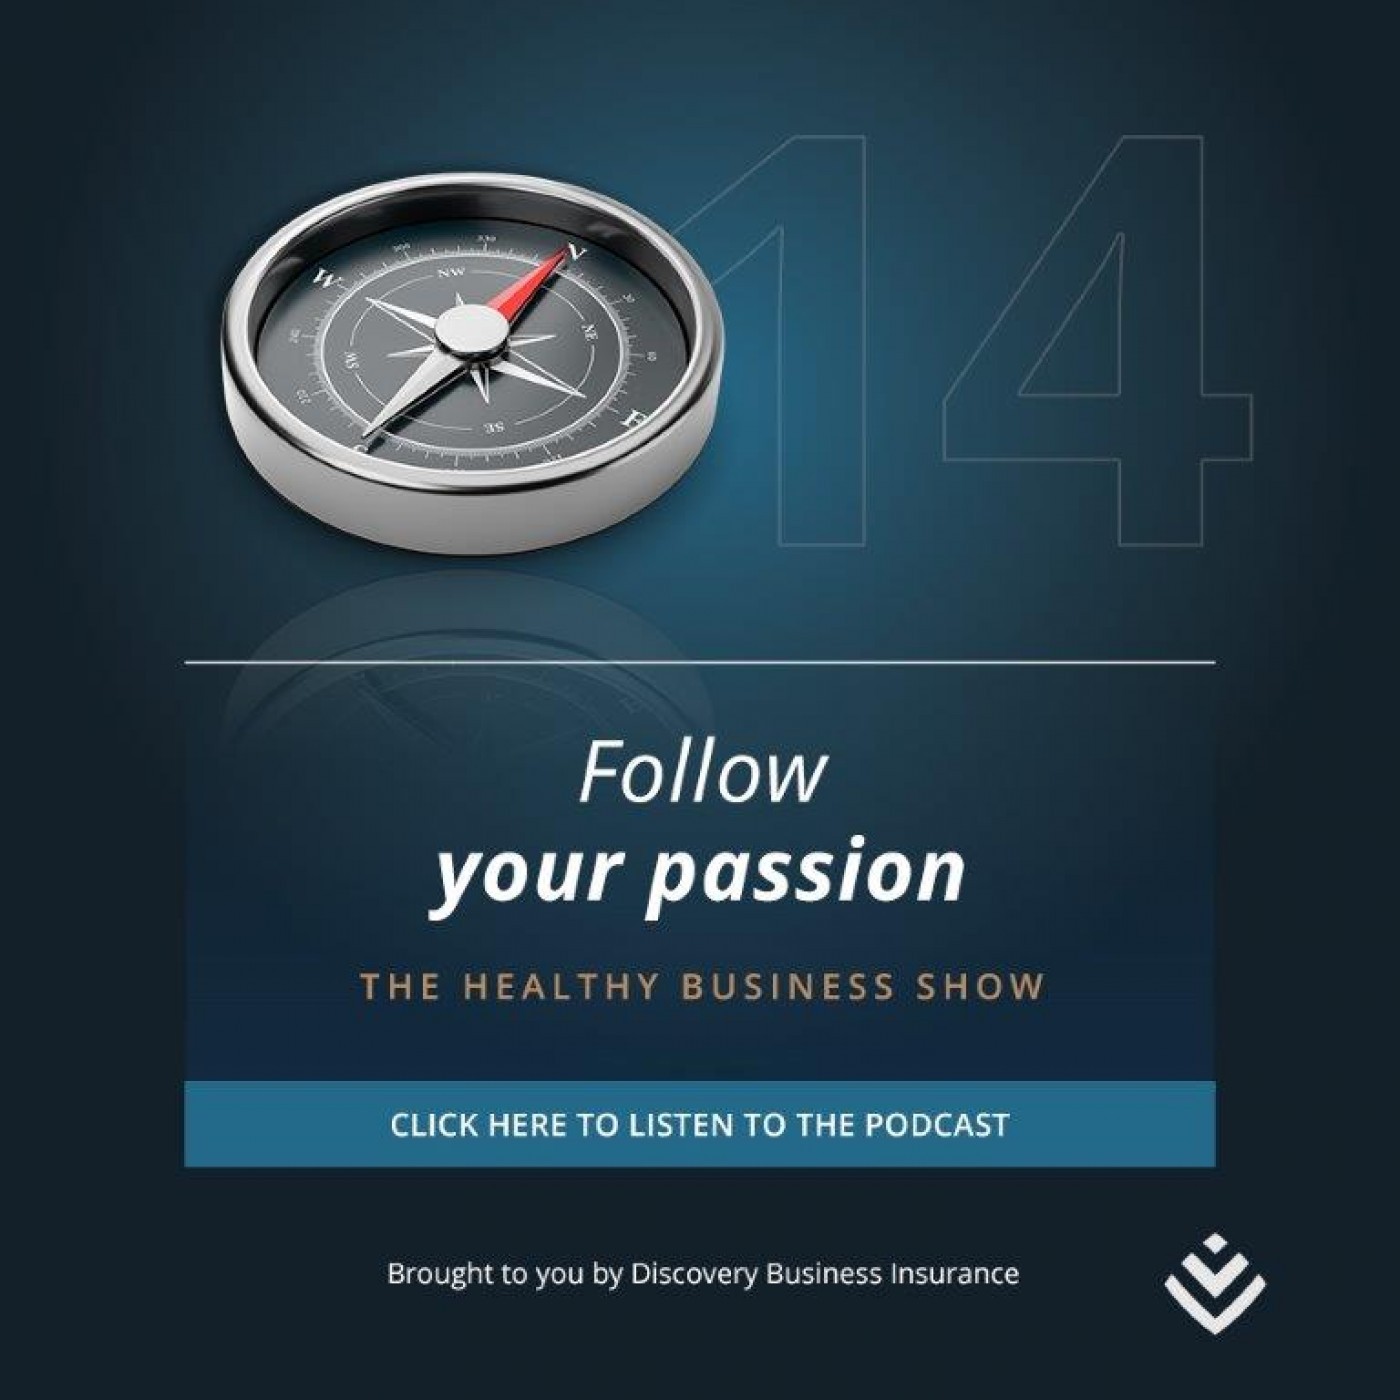 The Healthy Business Show: Follow your passion